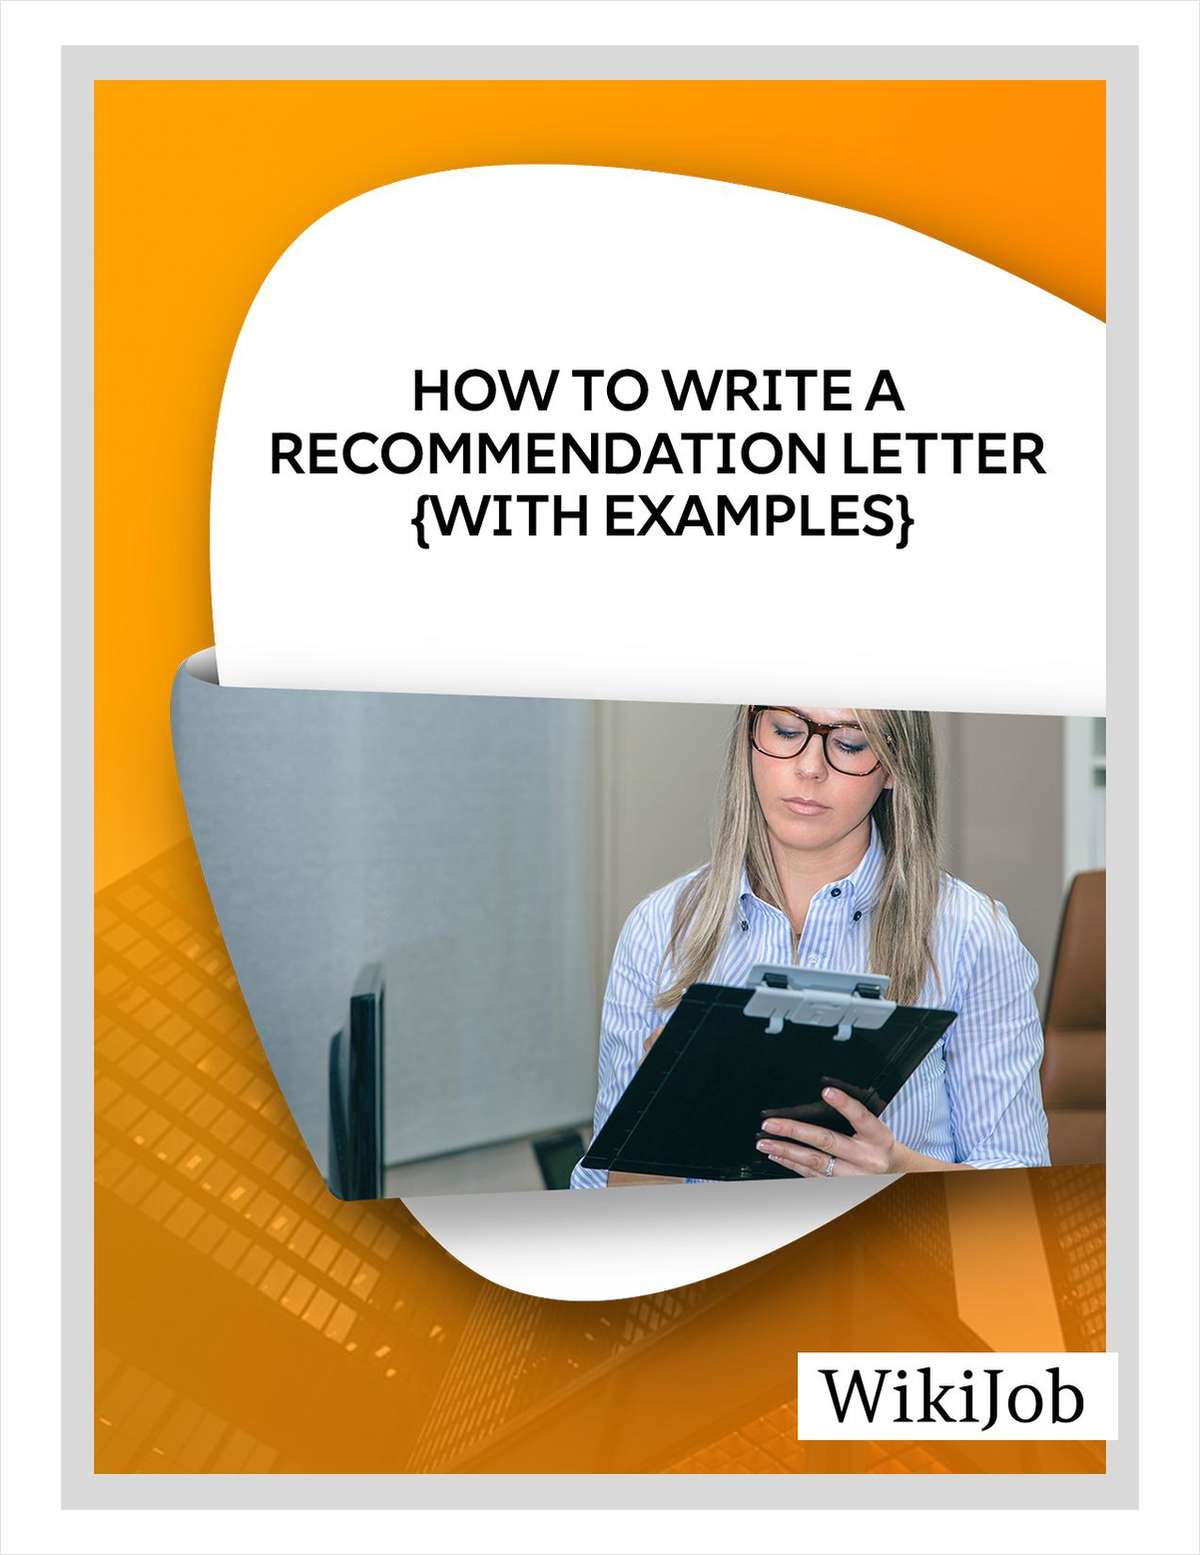 How to Write a Recommendation Letter (With Examples and Templates)